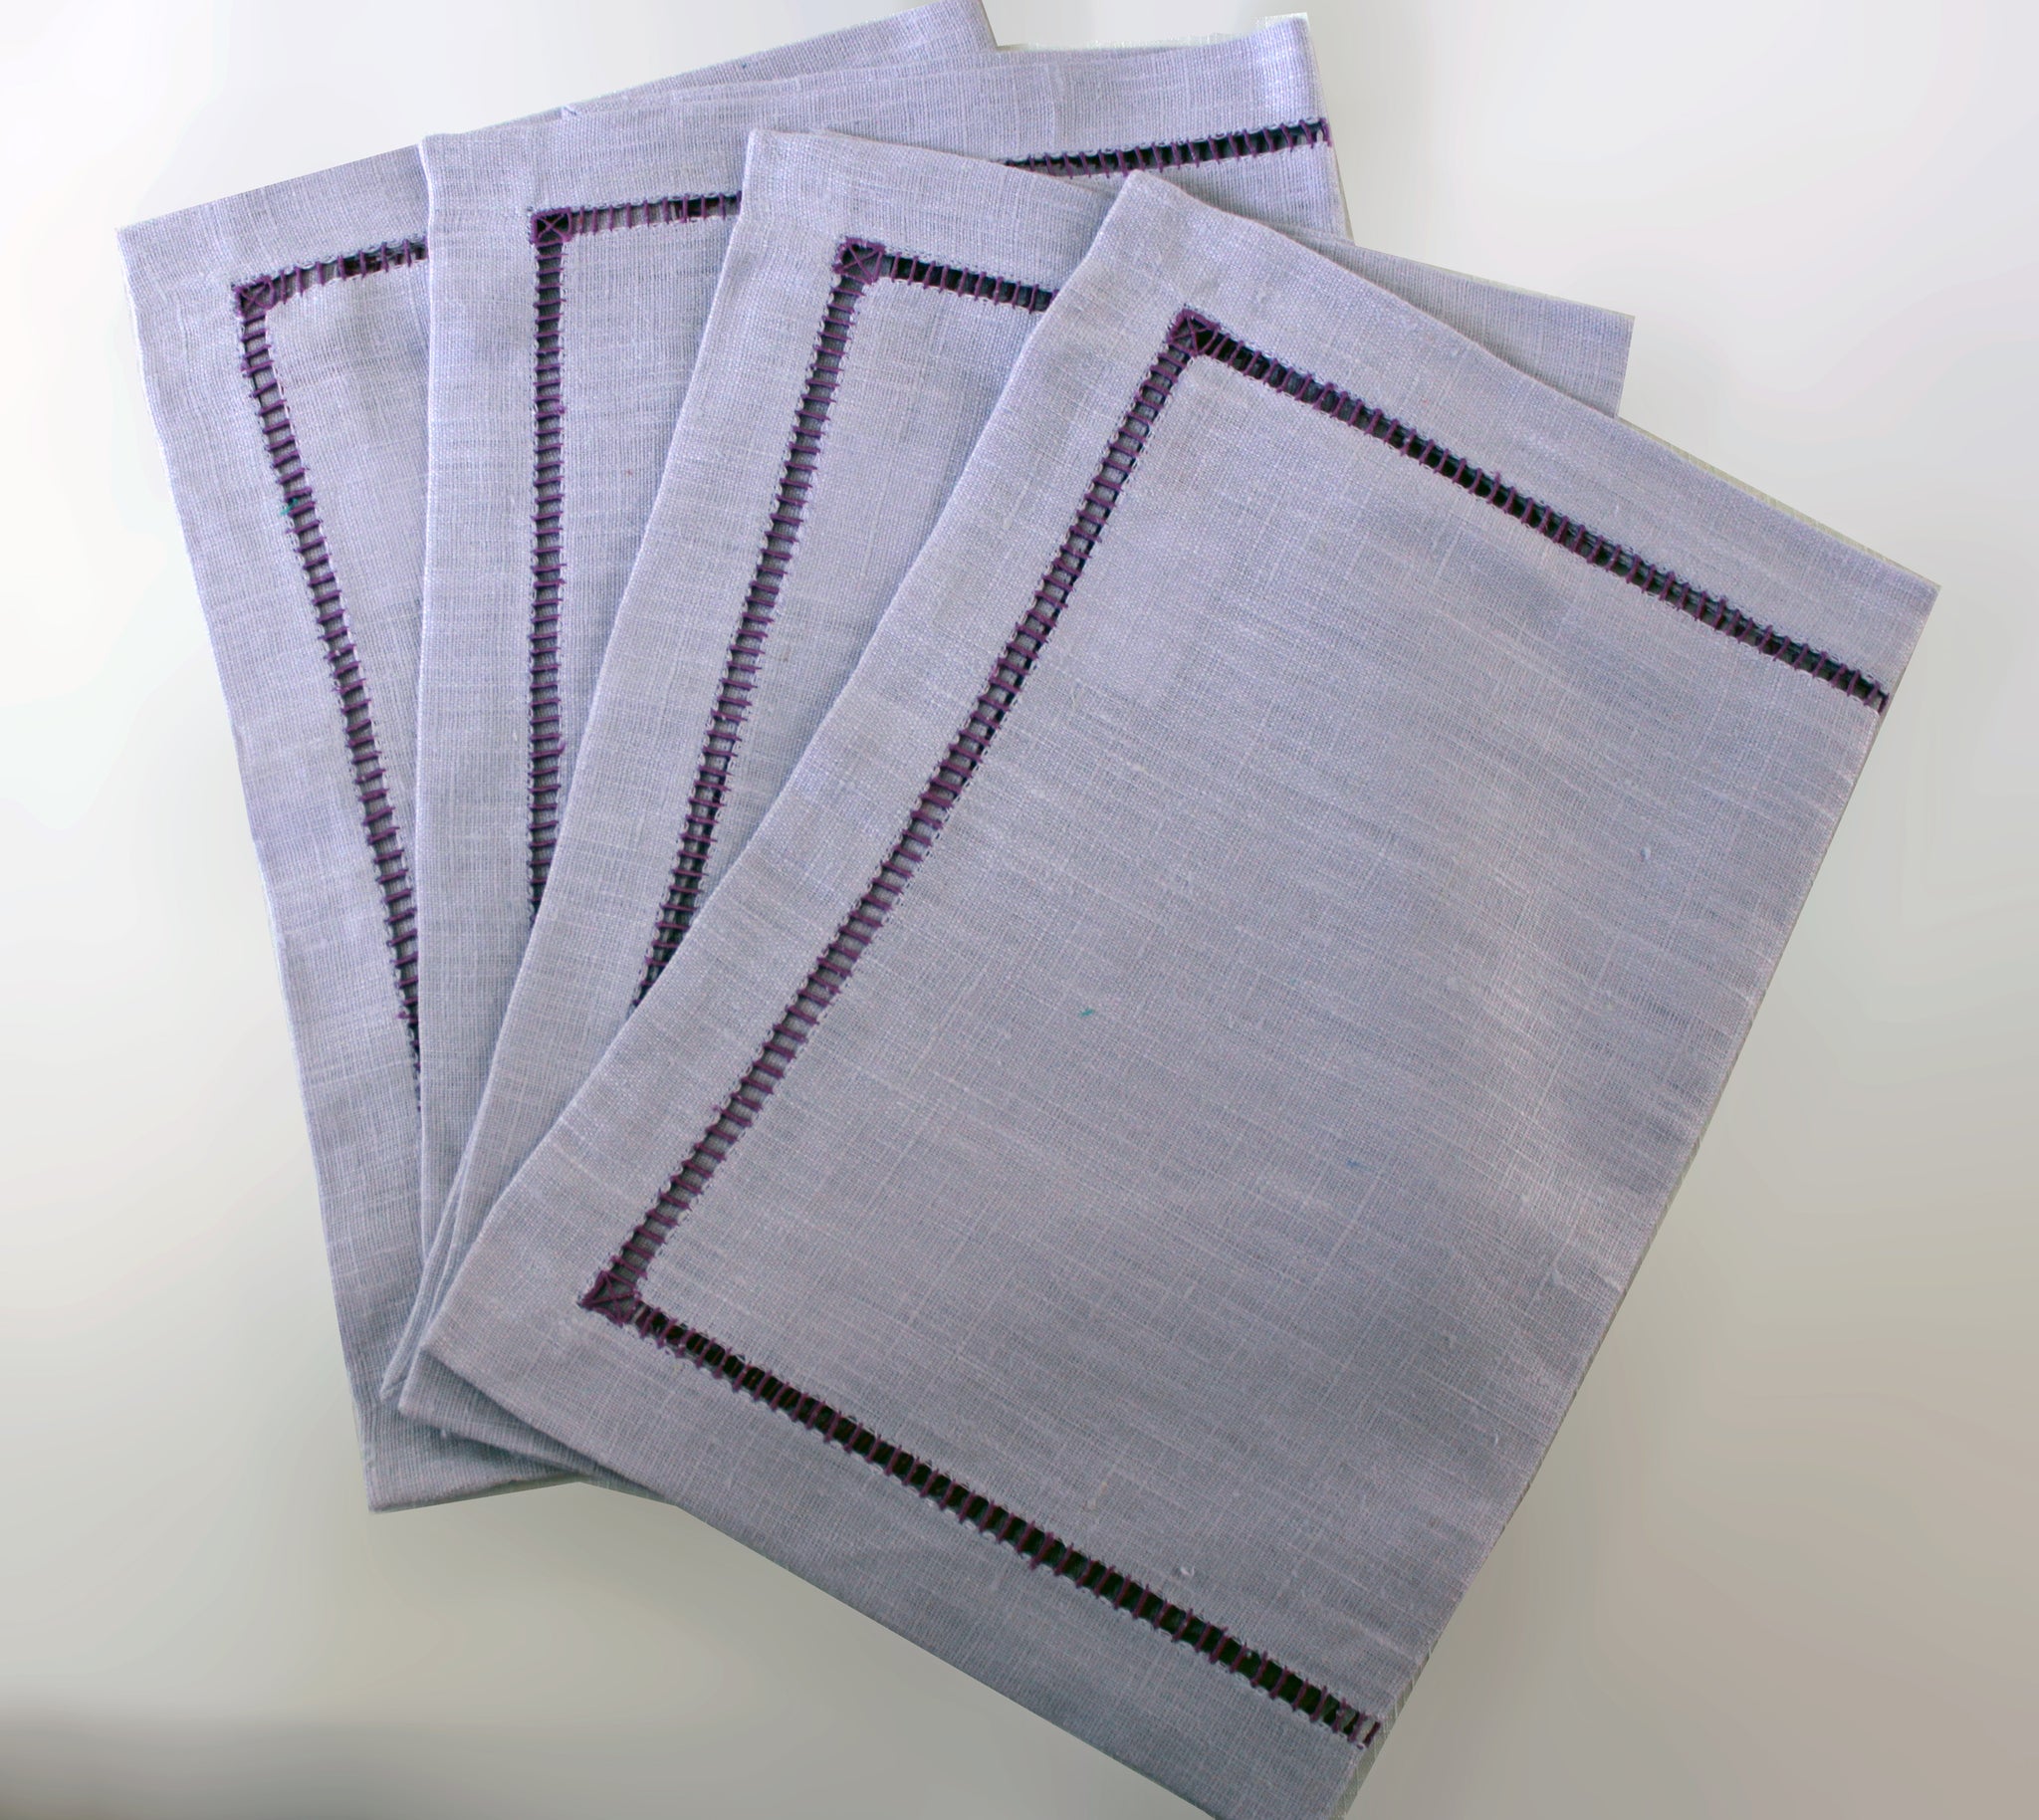 Cara Mia Linen Placemats in Lavender  Set of 4